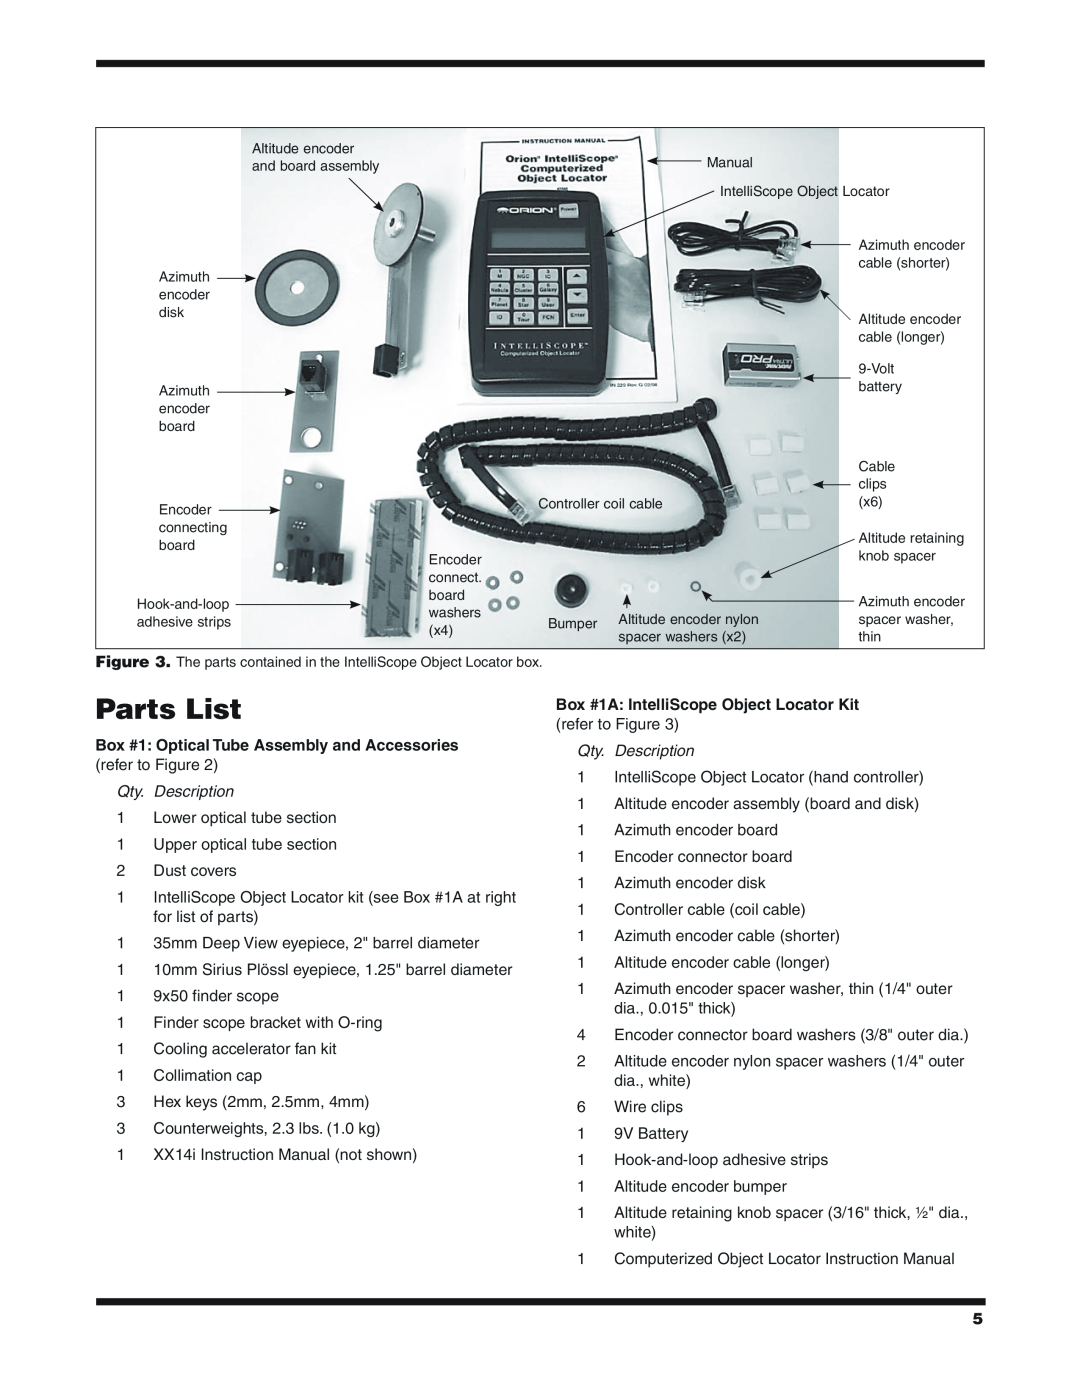 Orion 9791 instruction manual Parts List, Box #1 Optical Tube Assembly and Accessories refer to Figure, Qty. Description 